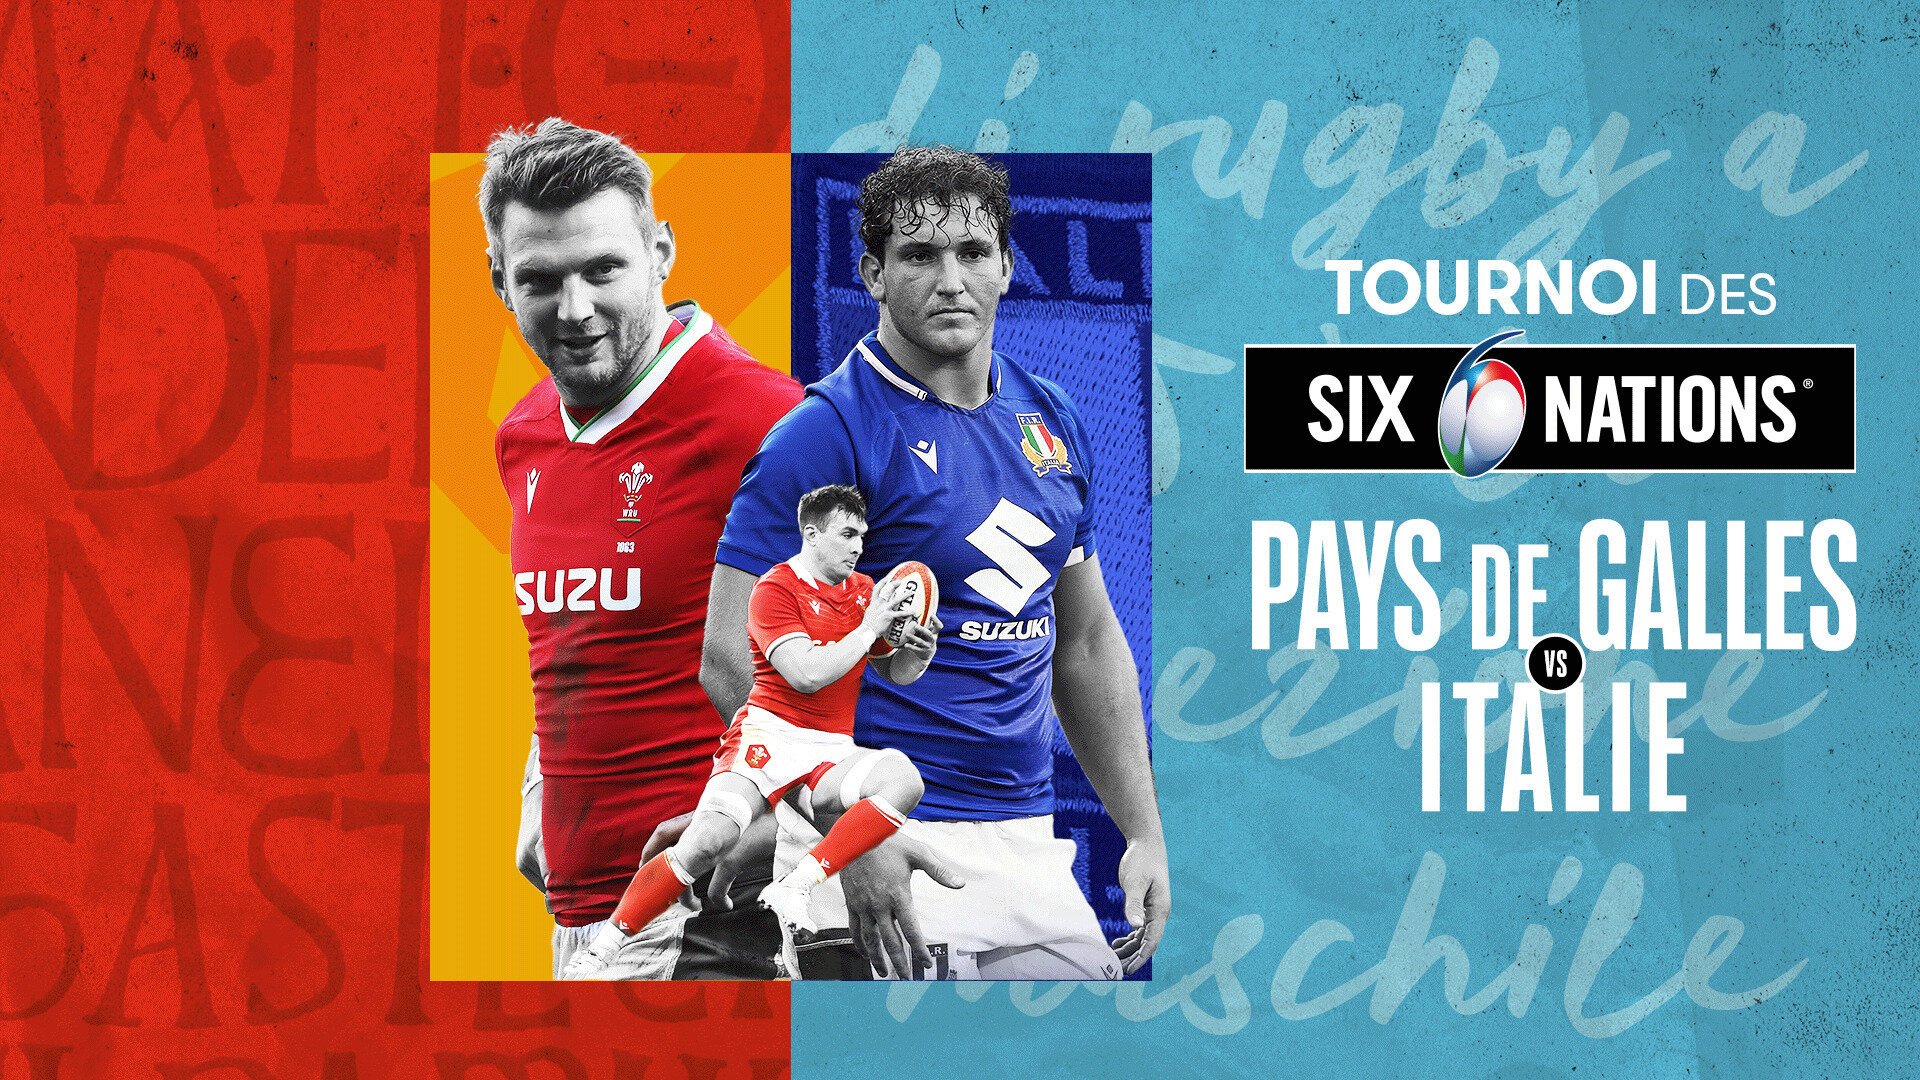 Rugby and Seduction: The Steamiest Scenes from Tournoi des 6 Nations